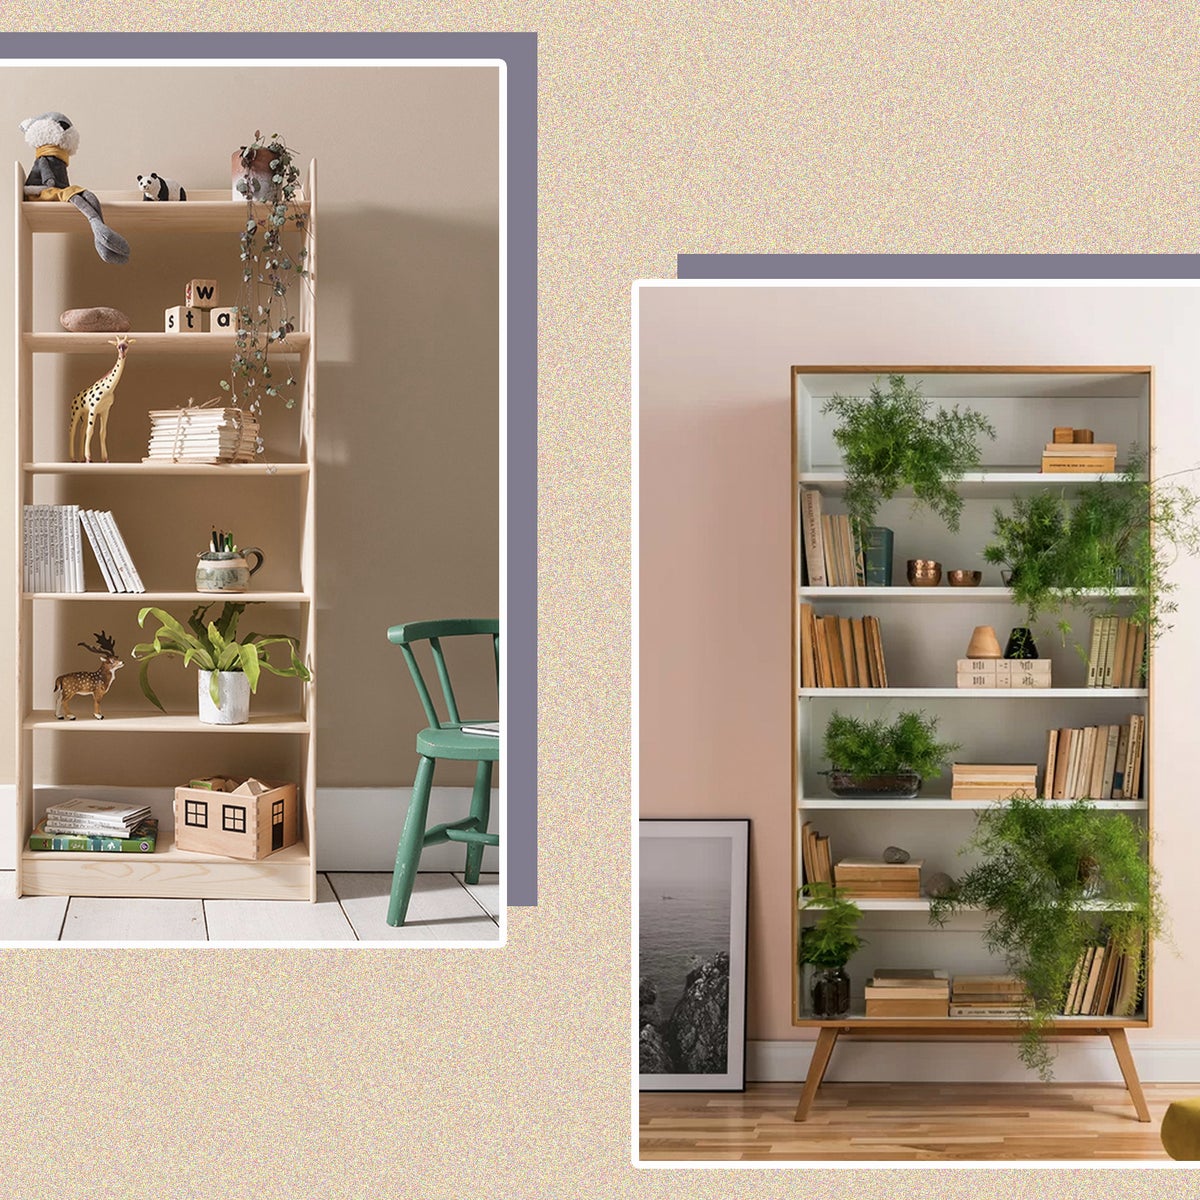 https://static.independent.co.uk/2020/12/18/16/best%20bookcases.jpg?width=1200&height=1200&fit=crop